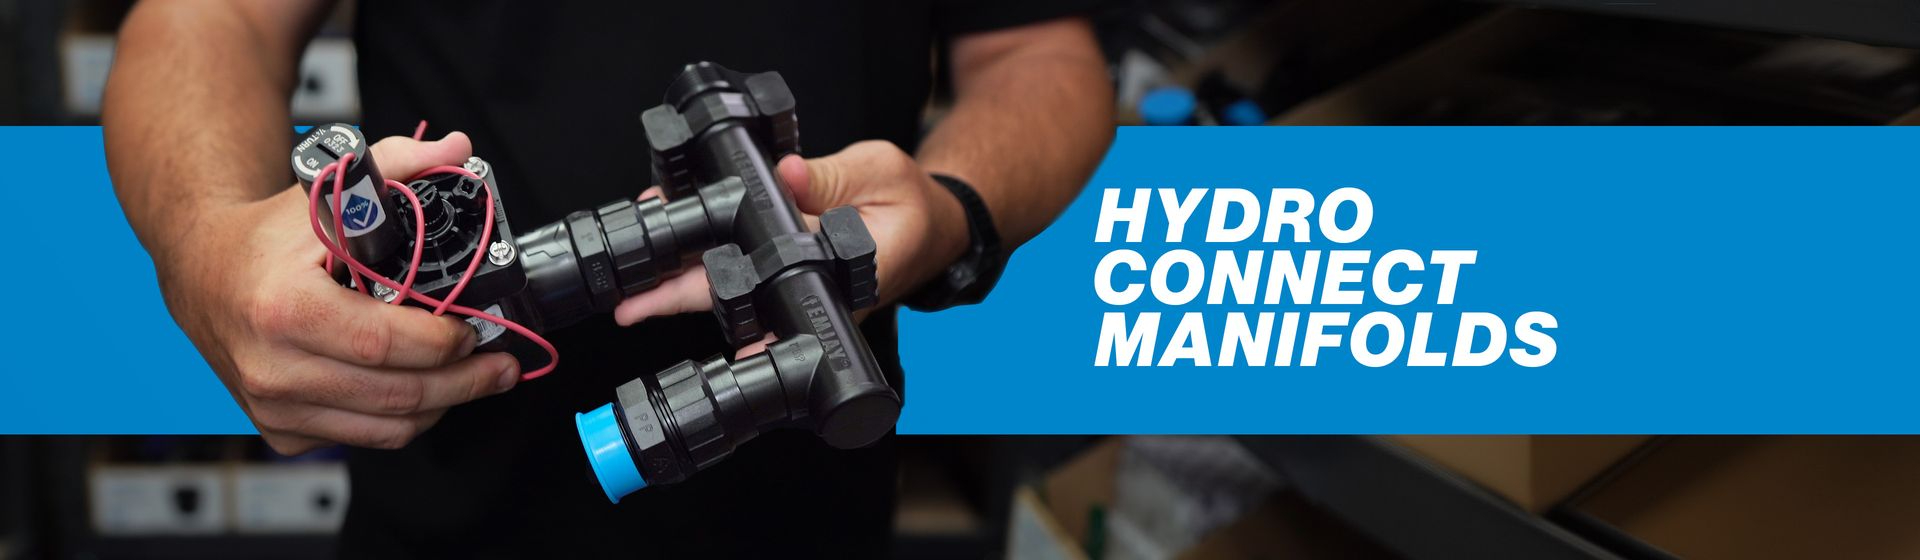 Hydro Connect Manifolds